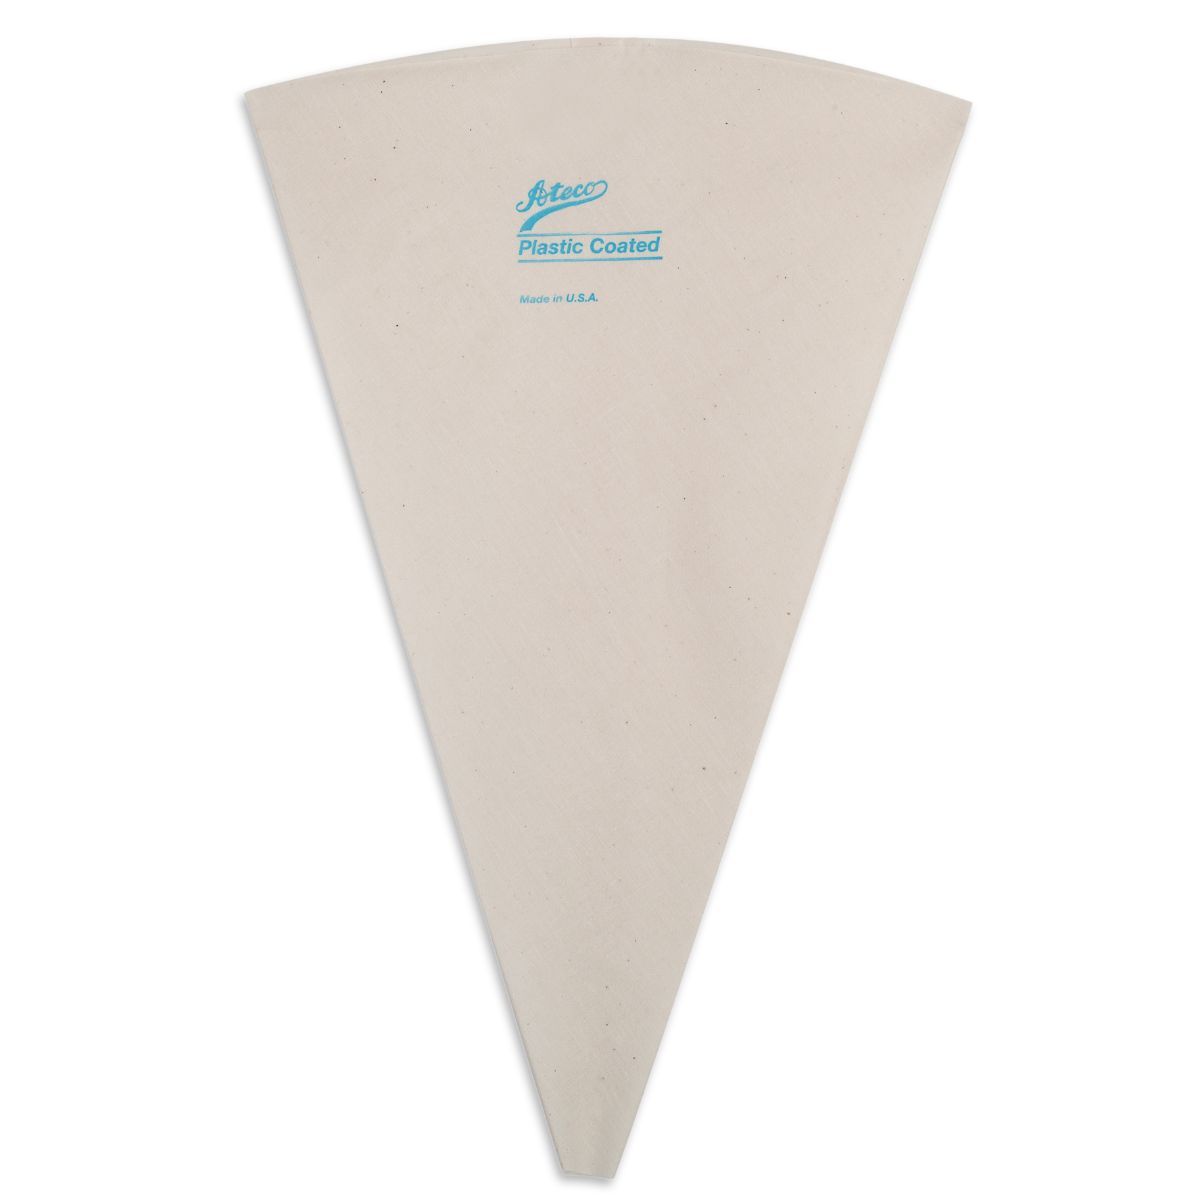 Plastic Coated Reusable Piping Bag — All Sizes Ateco Piping Bag - Bake Supply Plus